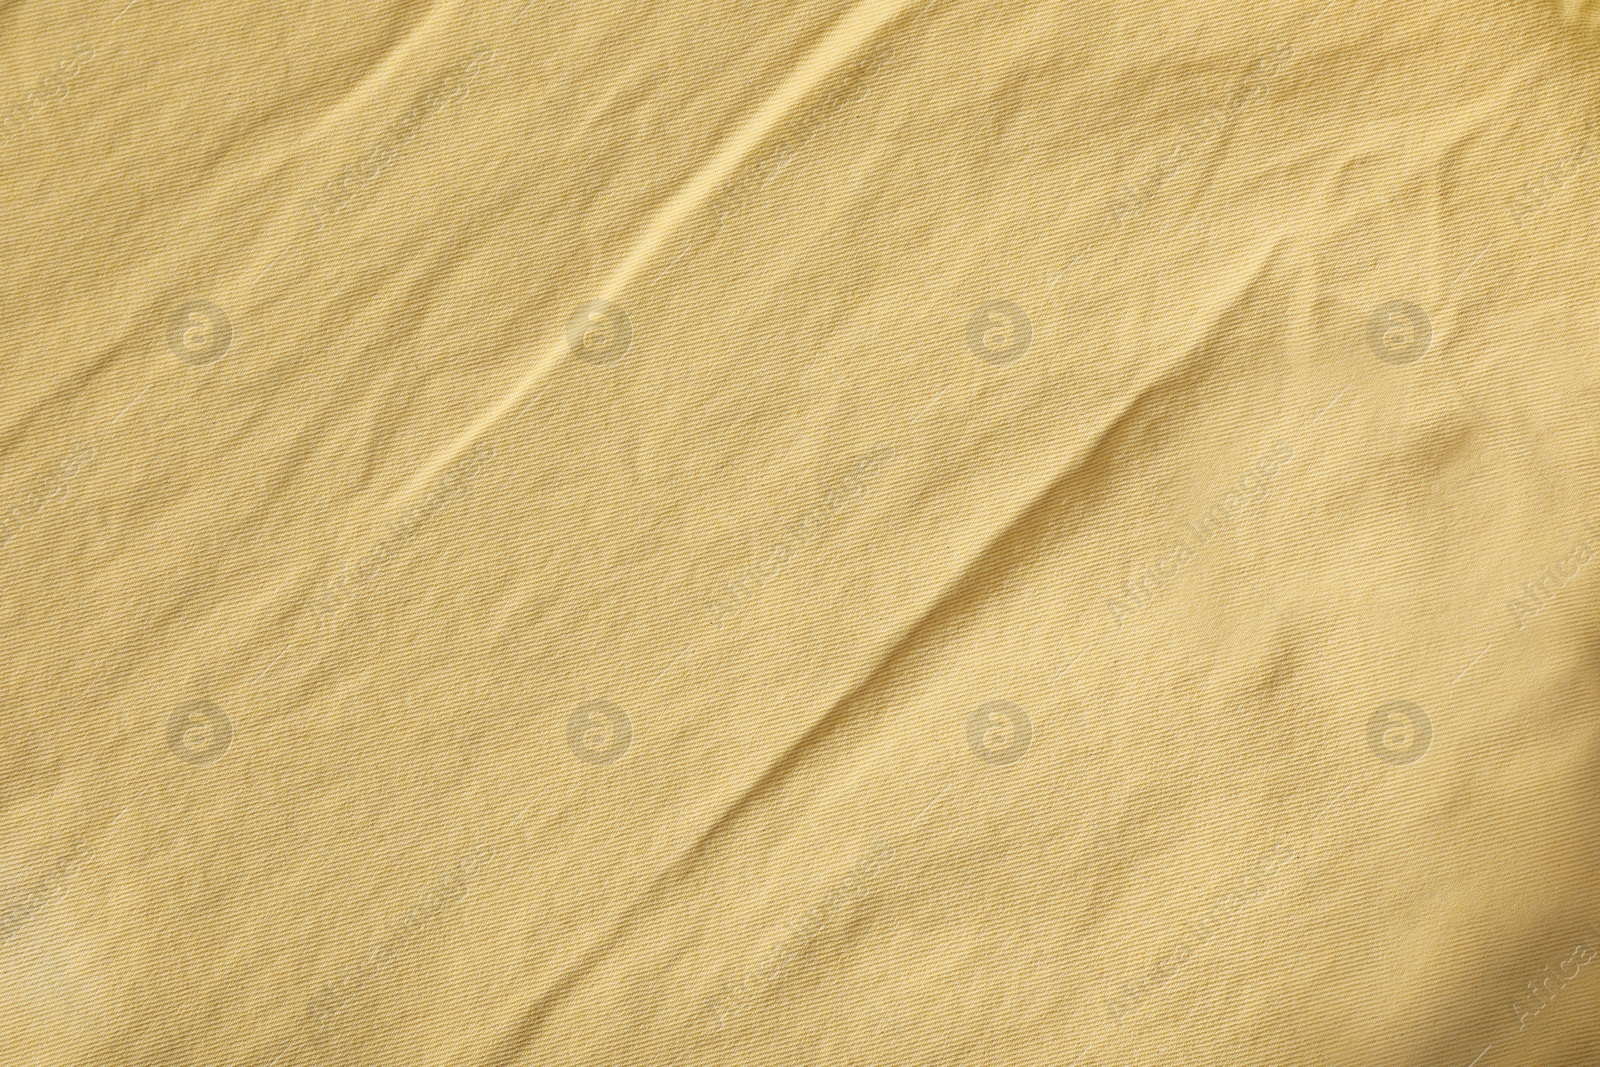 Photo of Crumpled pale yellow fabric as background, top view